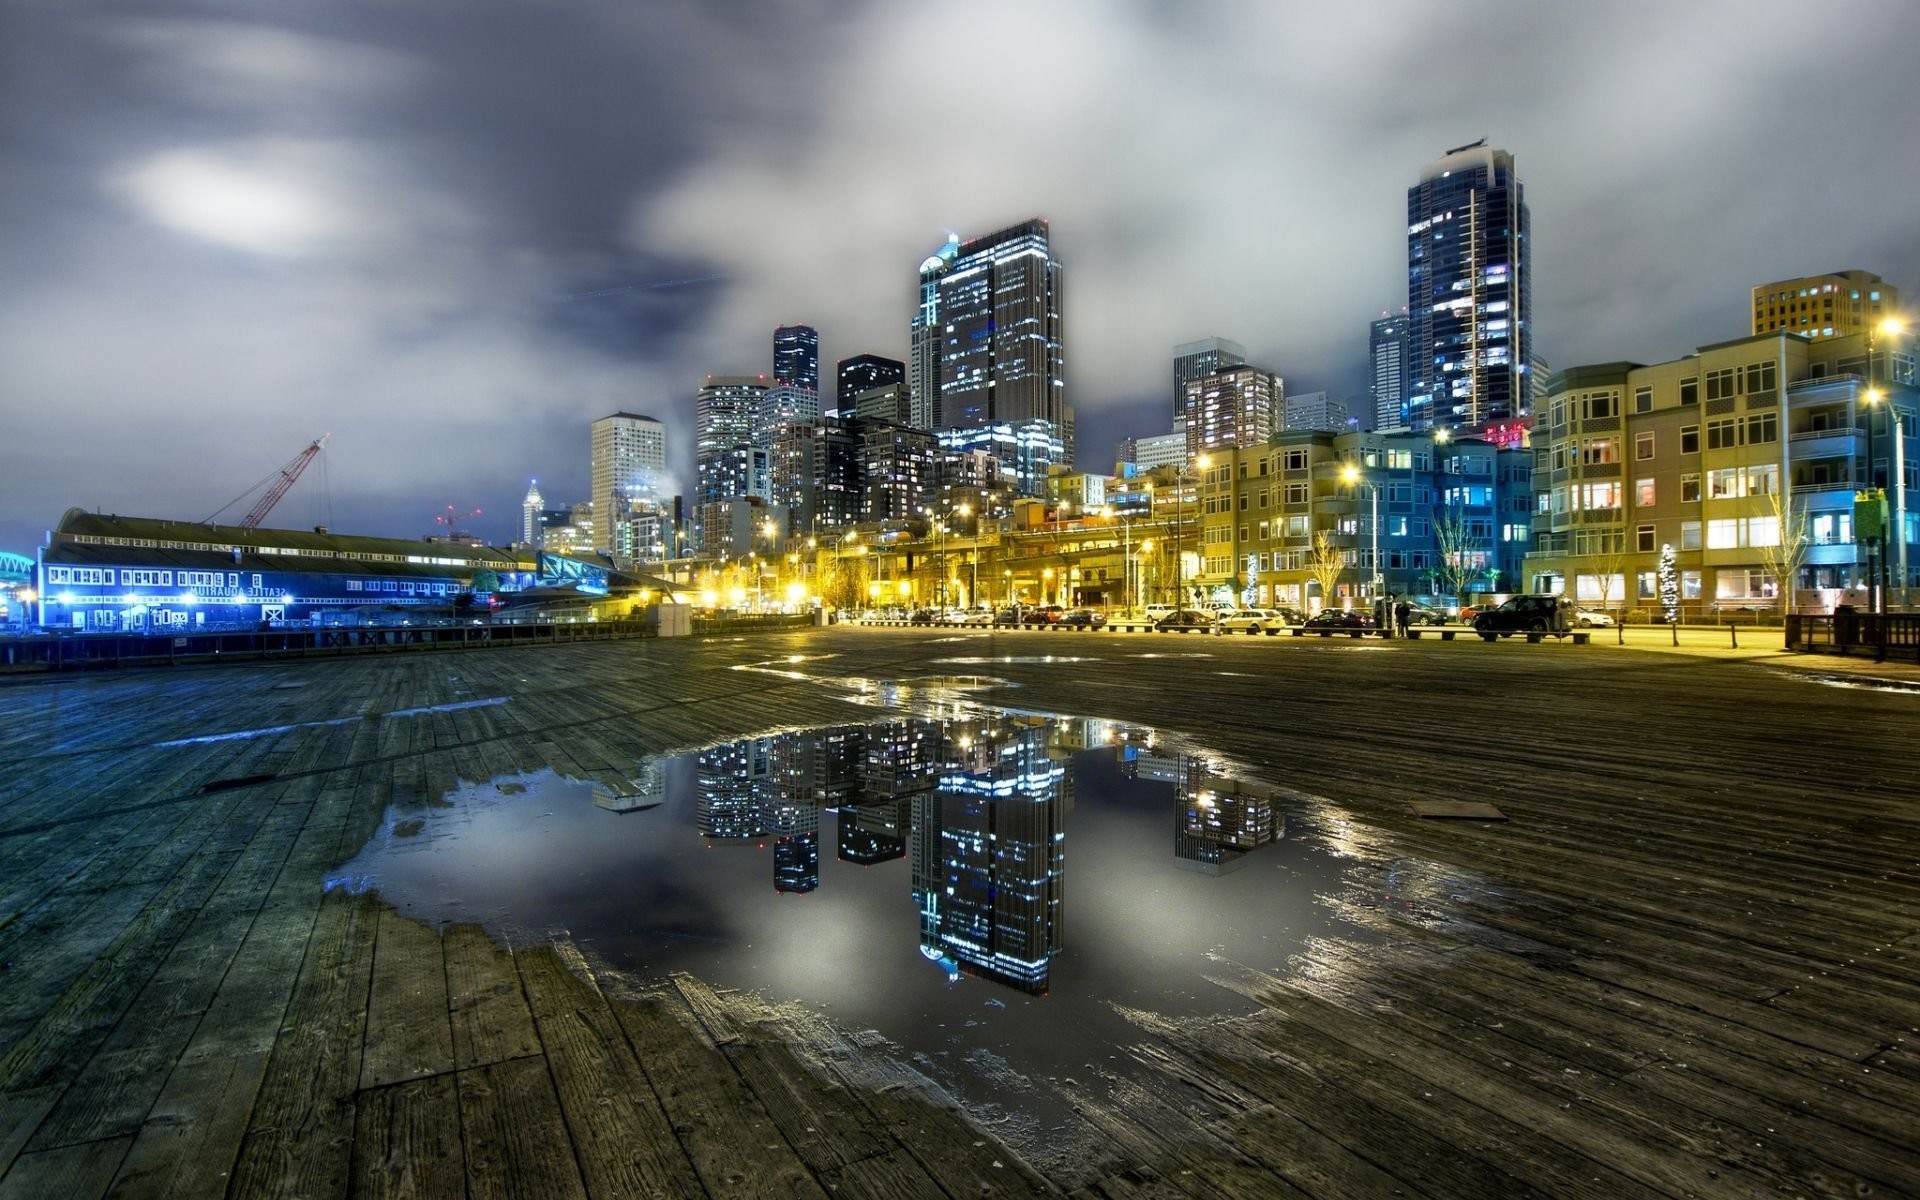 city, Cityscape, Architecture, Modern, Building, Skyscraper, Night, Lights, Sky, Clouds, Long exposure, Seattle, USA, Water, Puddle, Cranes (machine), Wooden surface, Street, Reflection Wallpaper